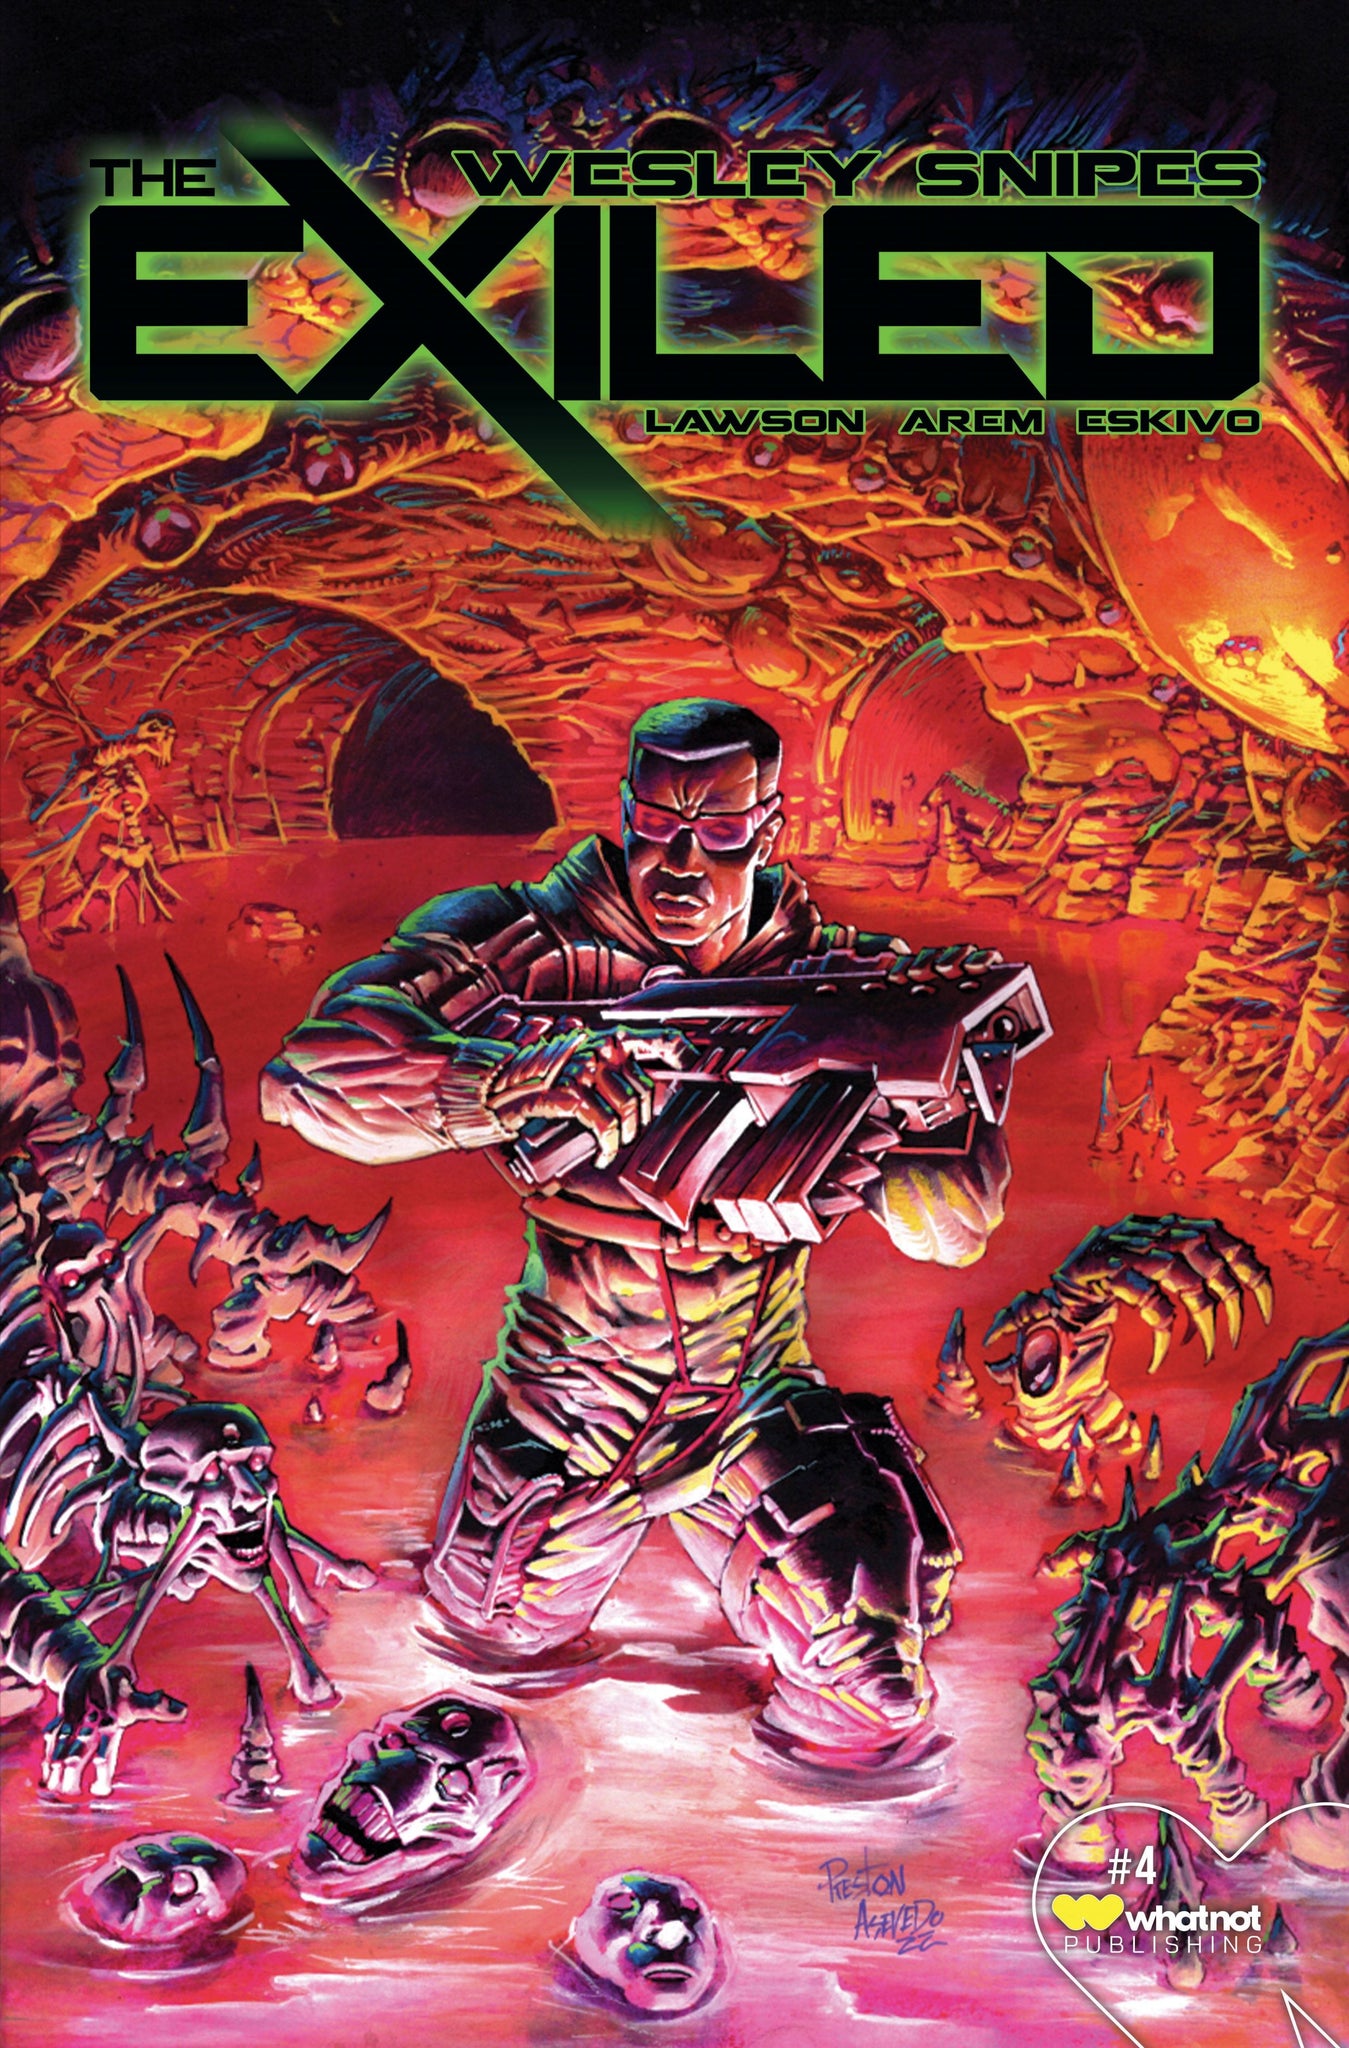 THE EXILED #4 (OF 6)